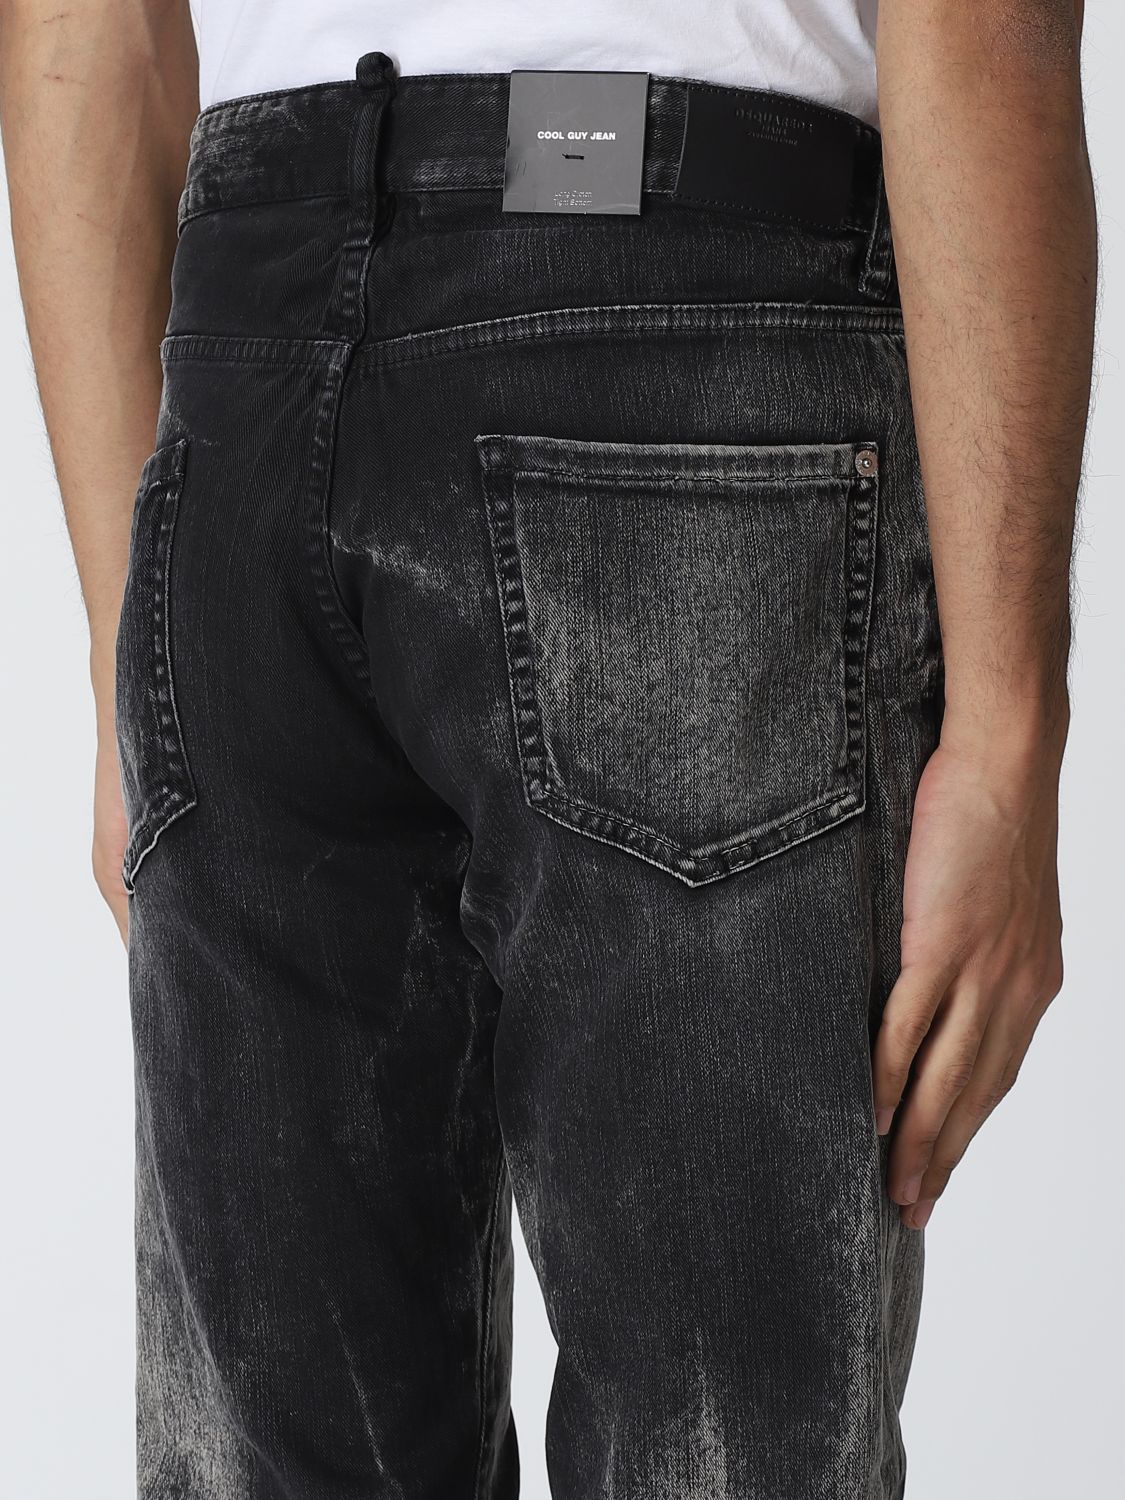 Jeans Dsquared2: Jeans Cool Guy Dsquared2 in denim washed nero 4